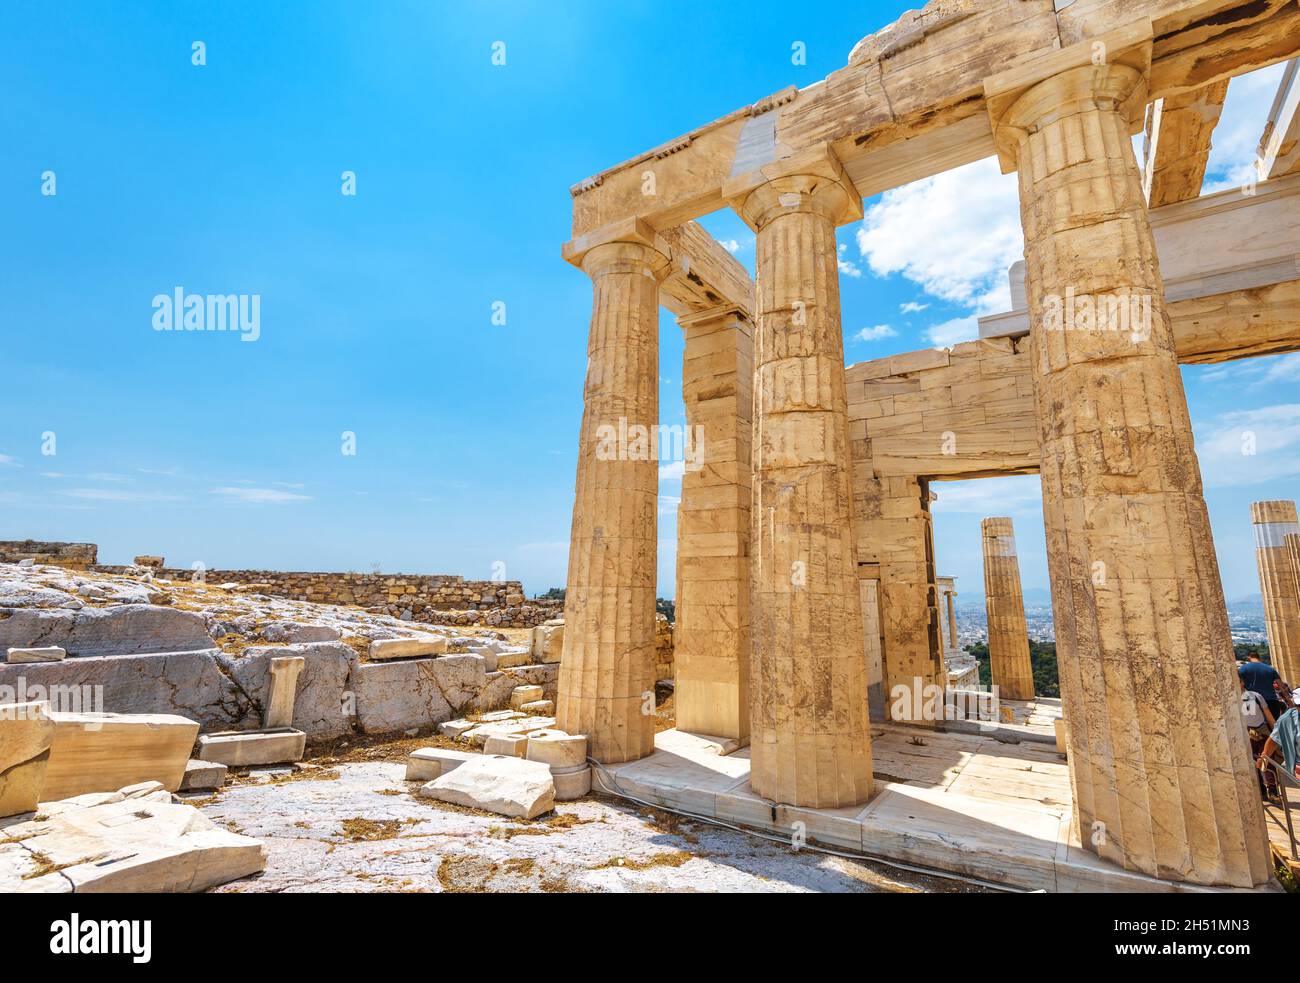 Ancient Greek ruins on Acropolis, Athens, Greece. Remains of Propylaea Palace on blue sky background in Athens city center. Concept of past civilizati Stock Photo